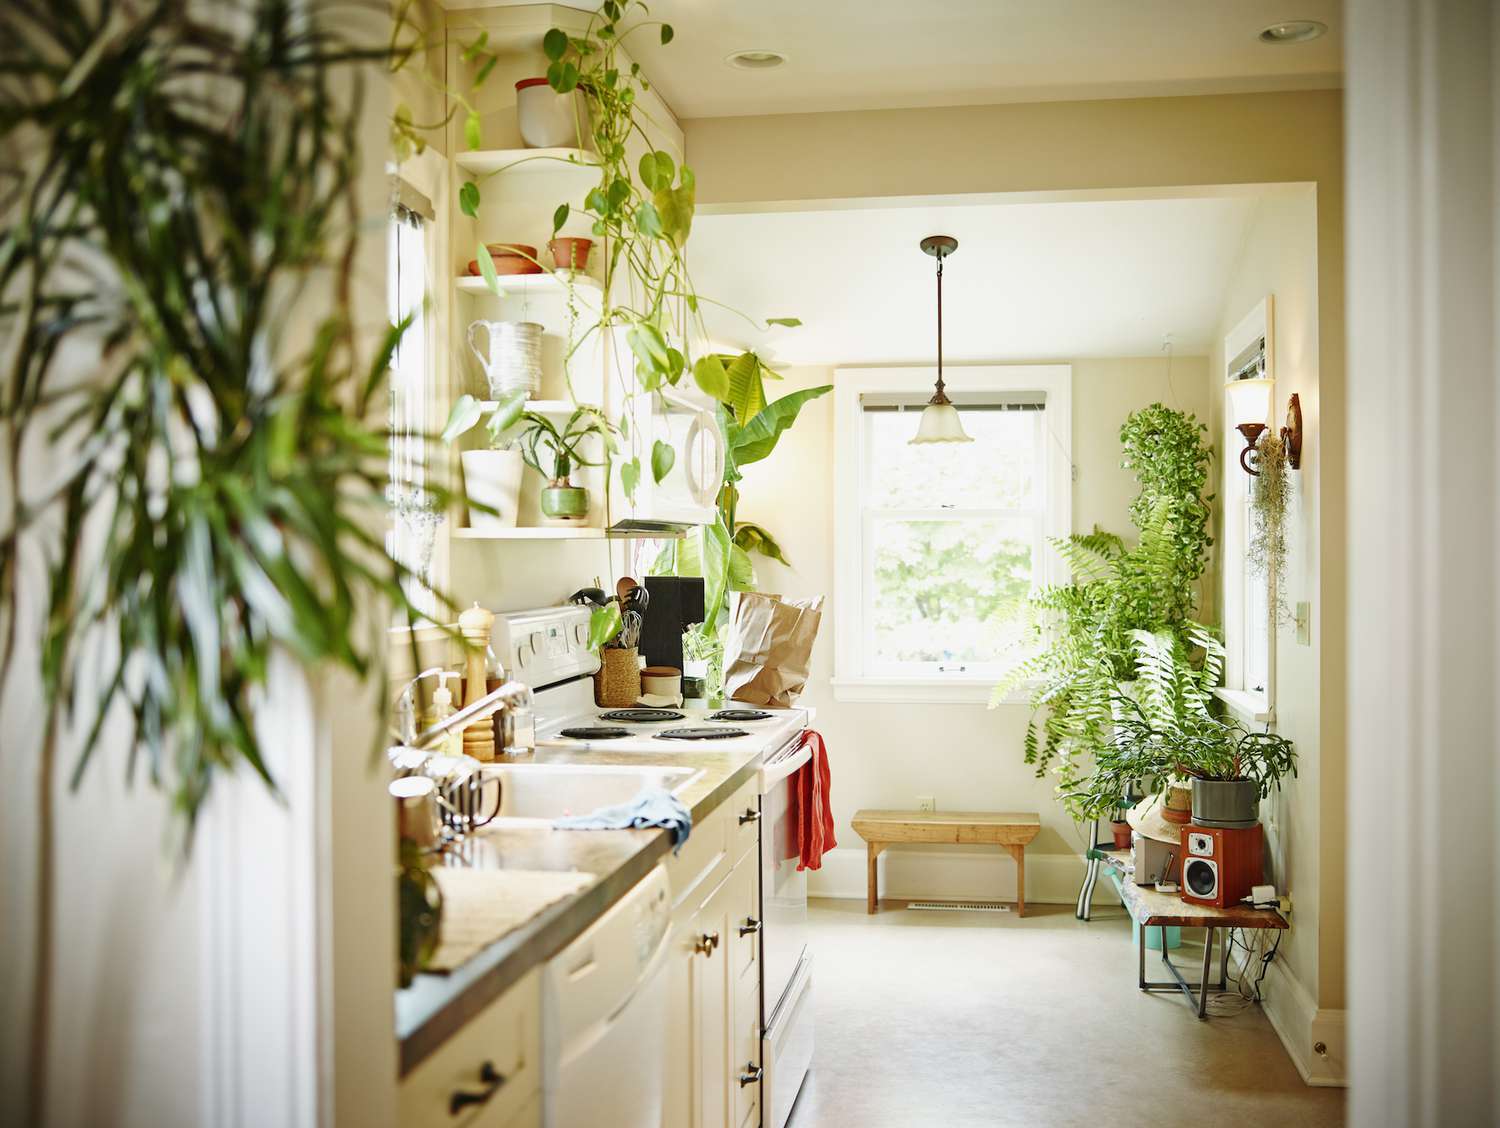 6 Ideas for Decorating With Houseplants